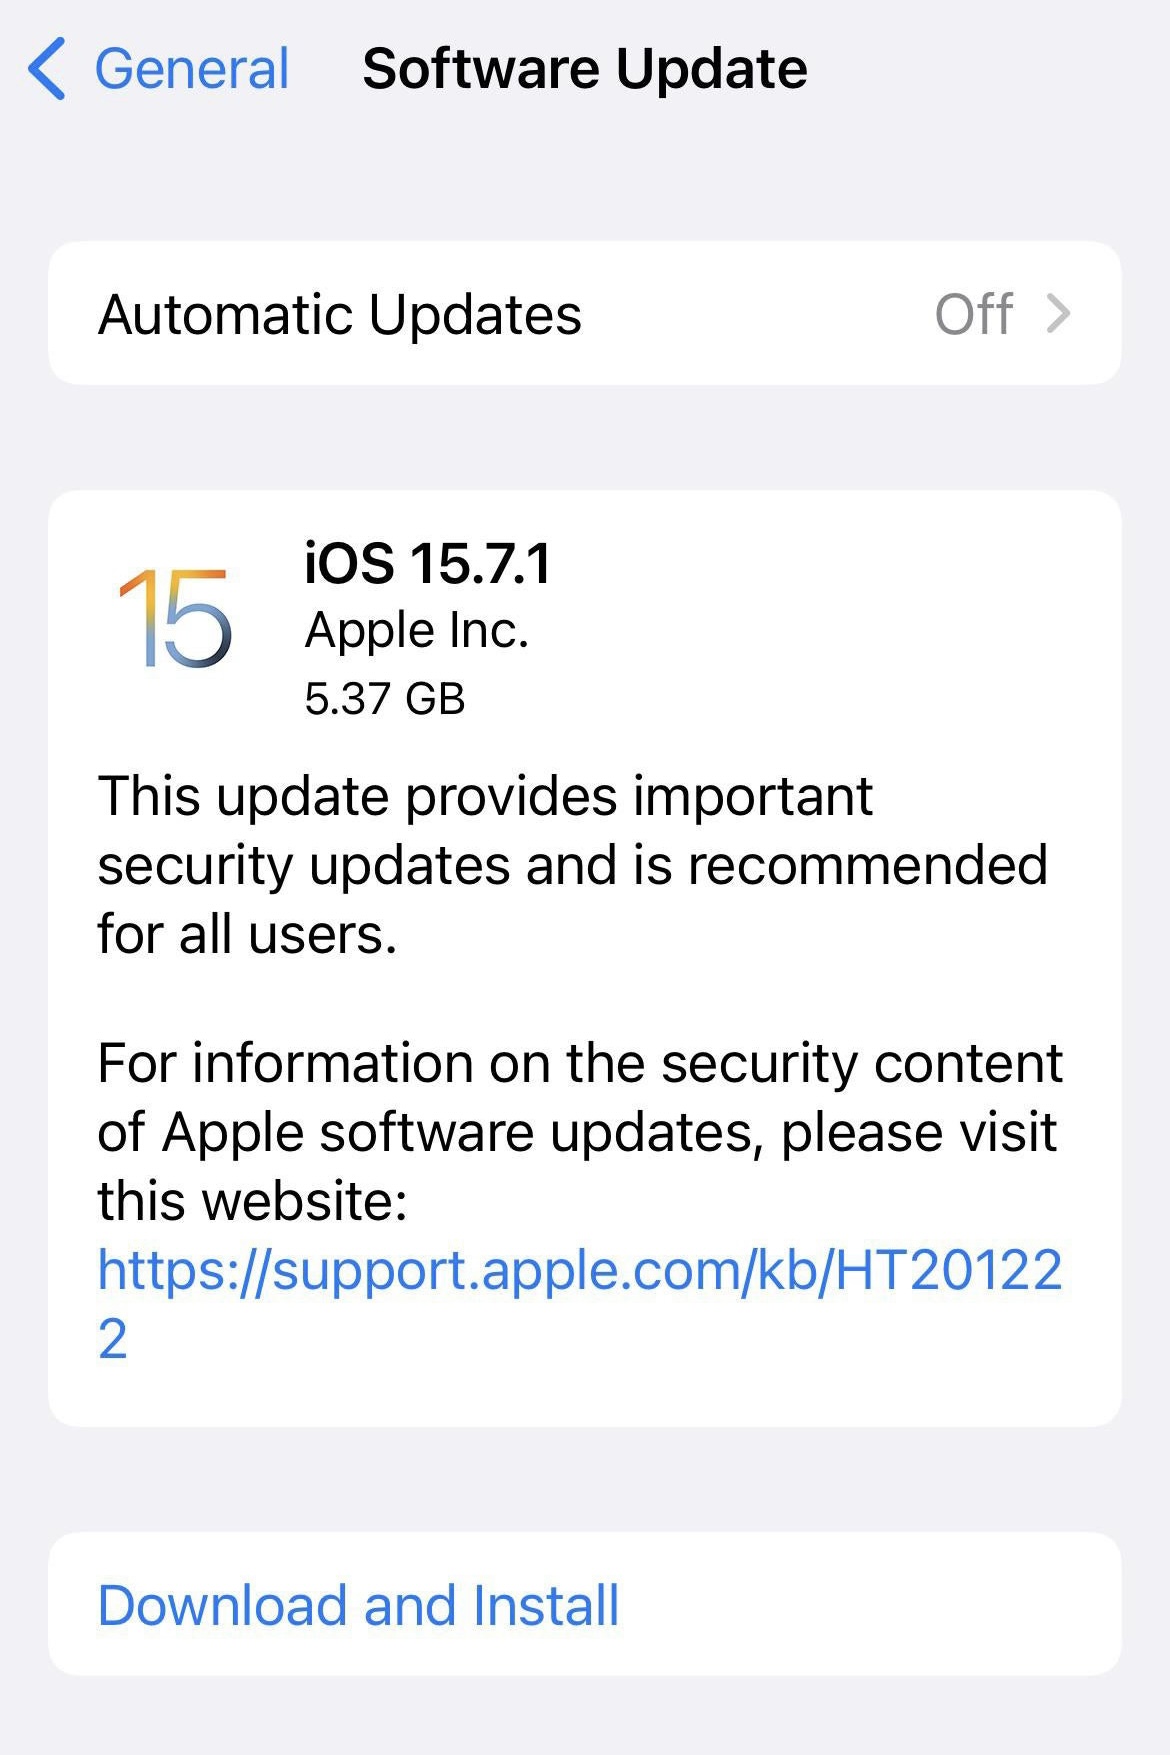 iOS 15.7.1 software update for iPhone.